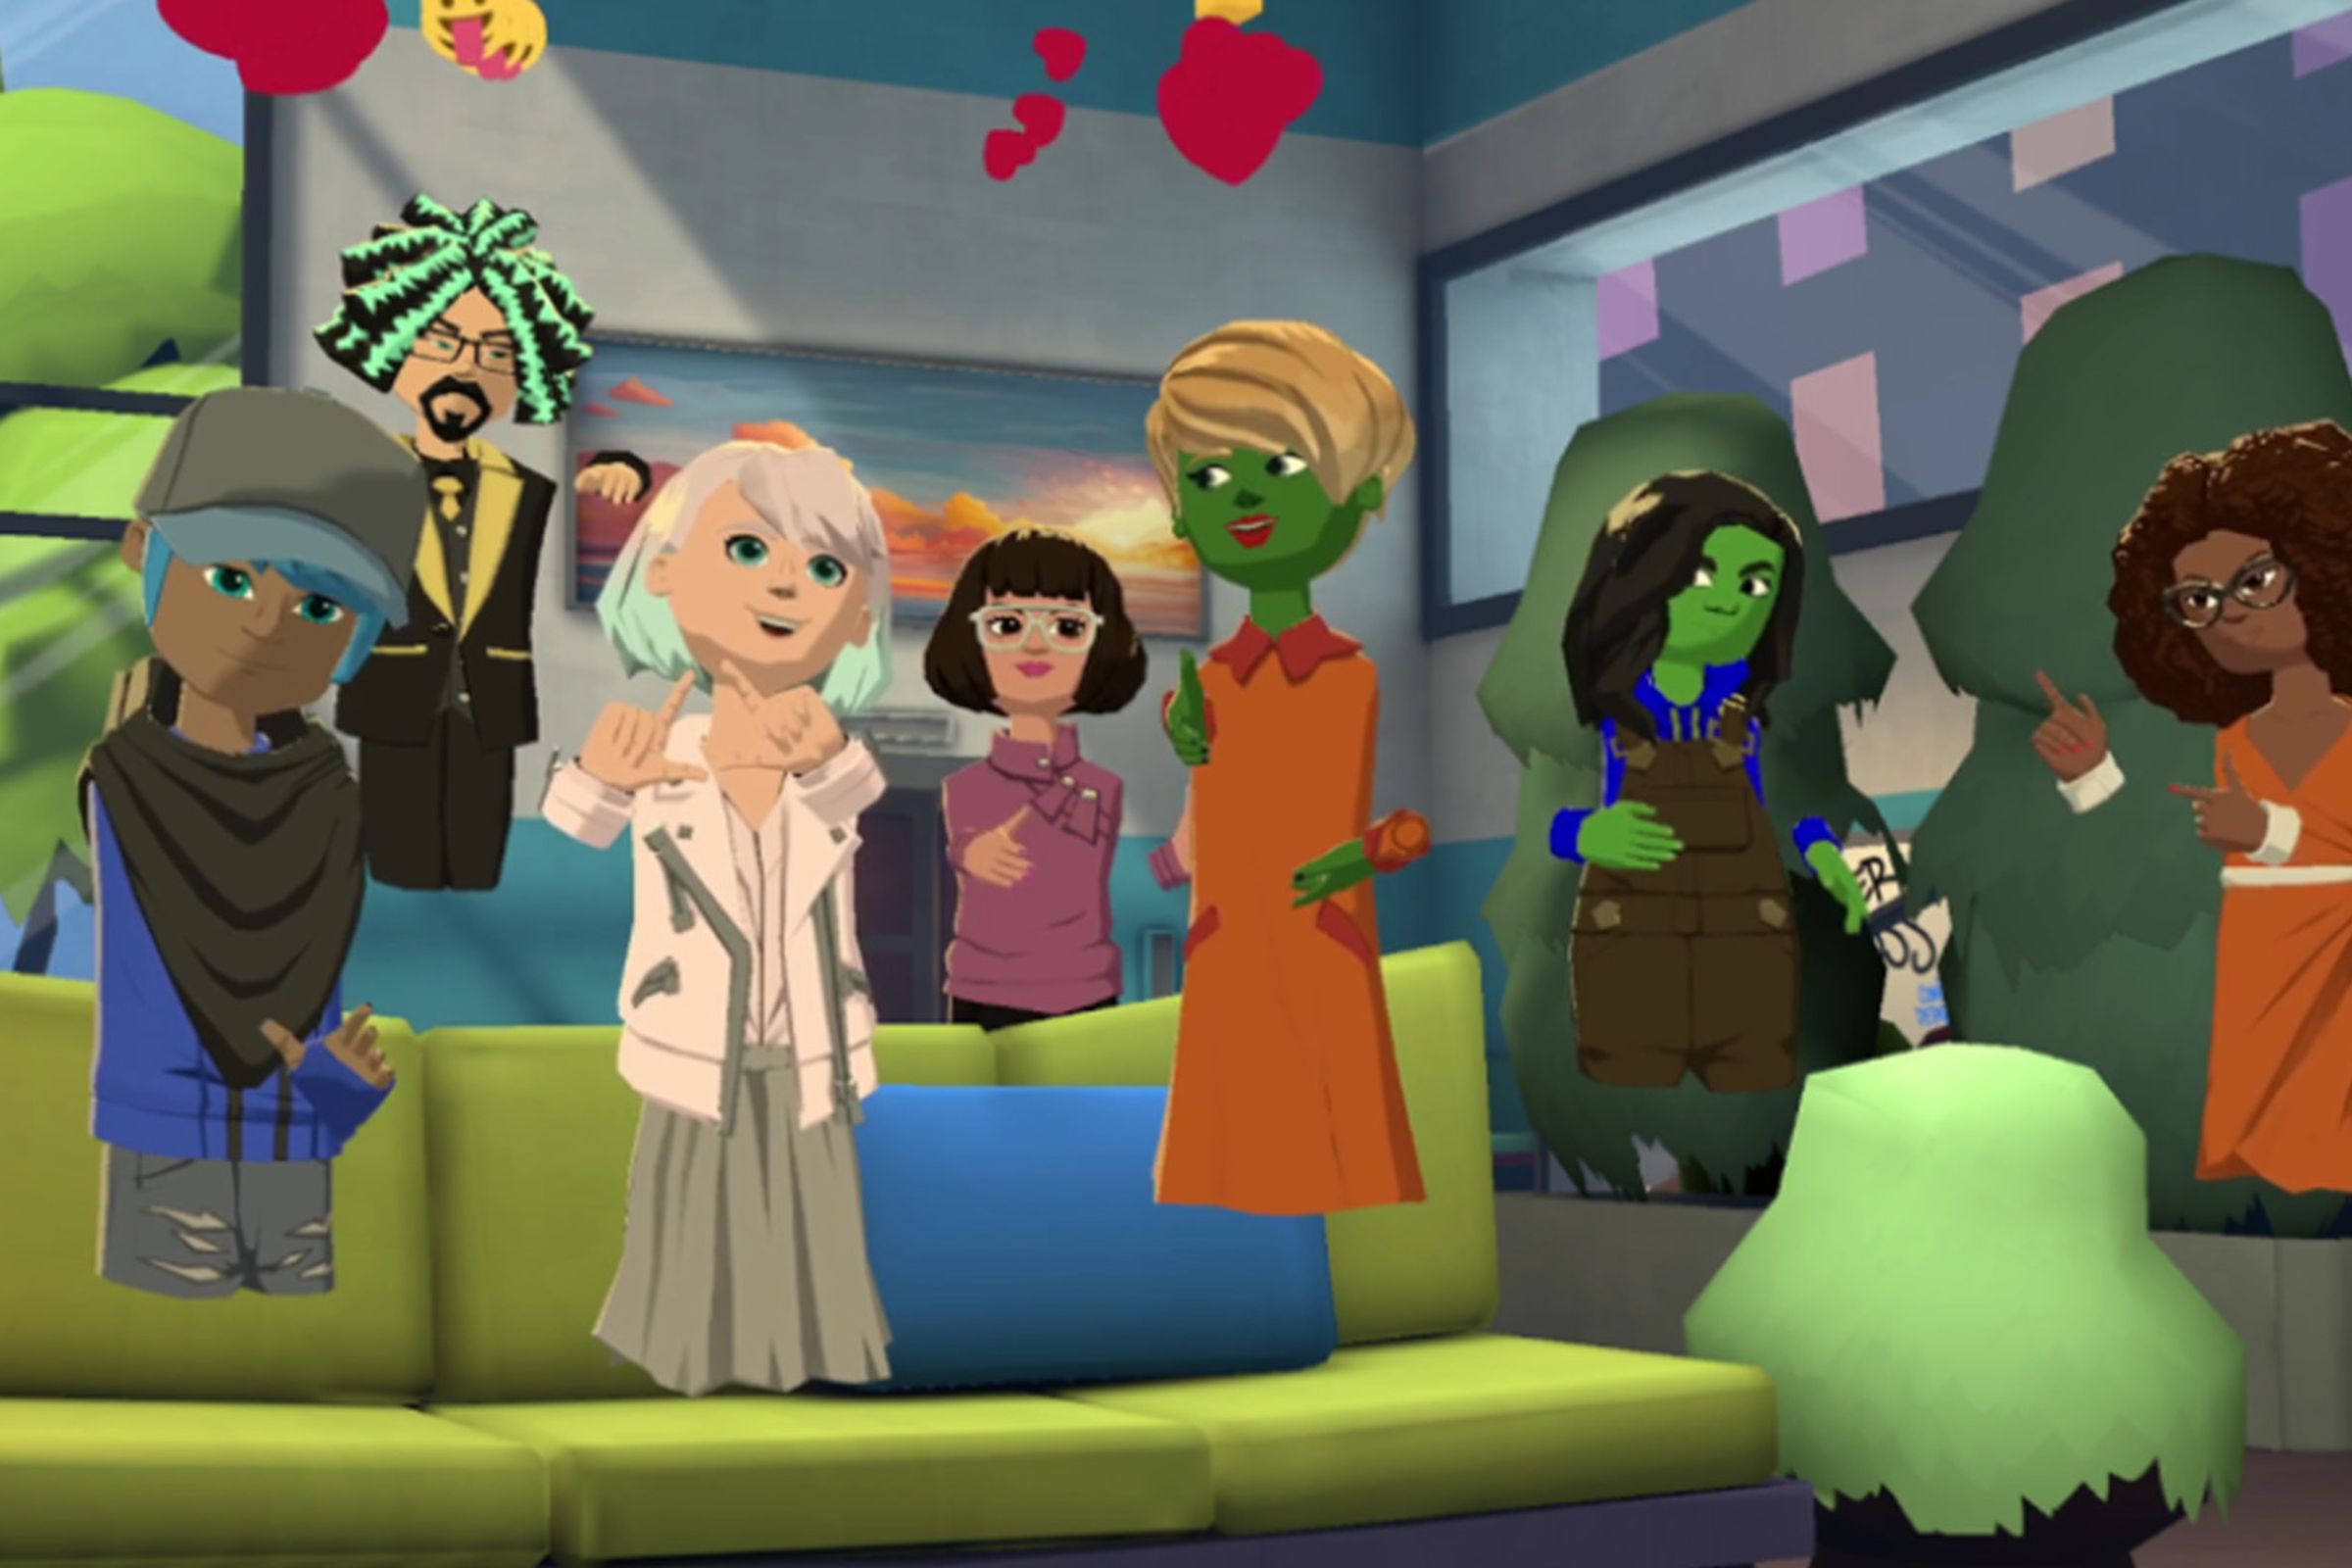 An image showing a group of avatars in Altspace VR